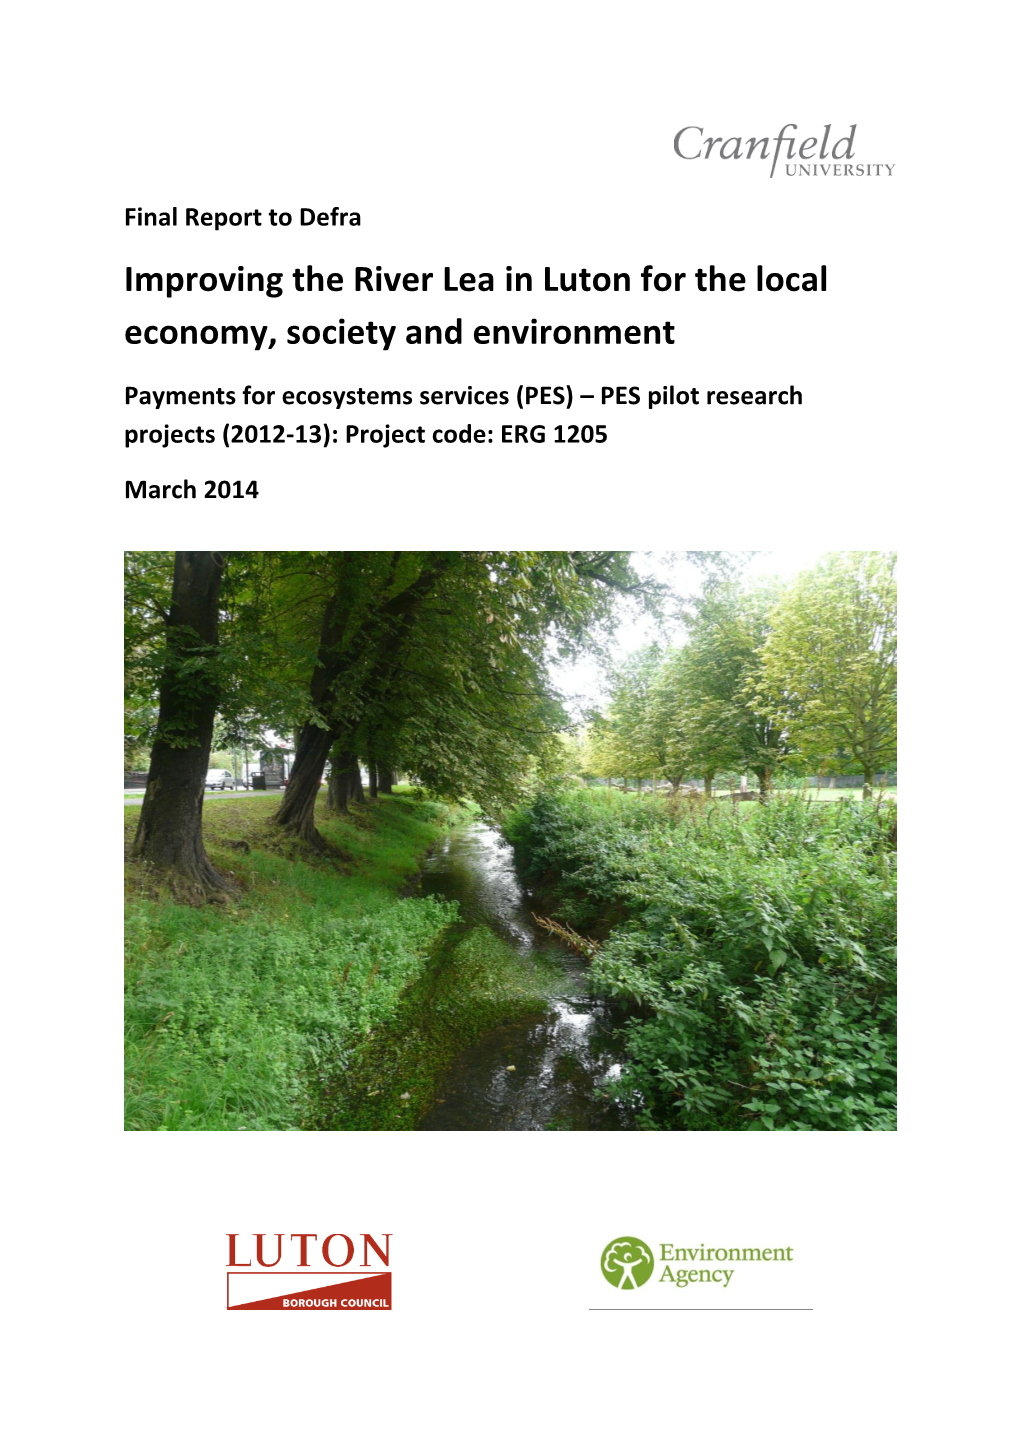 Improving the River Lea in Luton for the Local Economy, Society and Environment